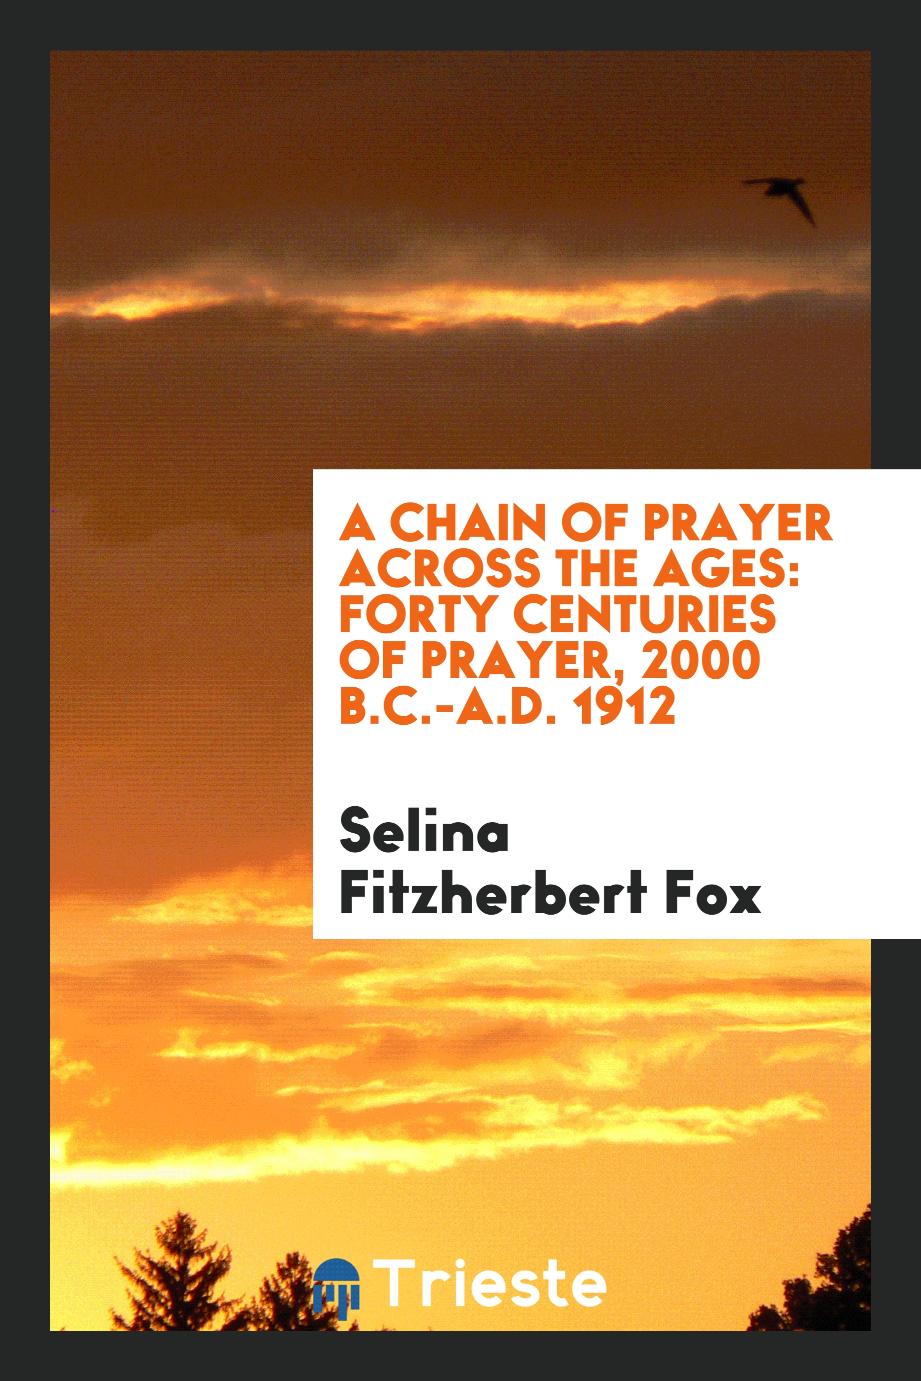 A chain of prayer across the ages: forty centuries of prayer, 2000 B.C.-A.D. 1912